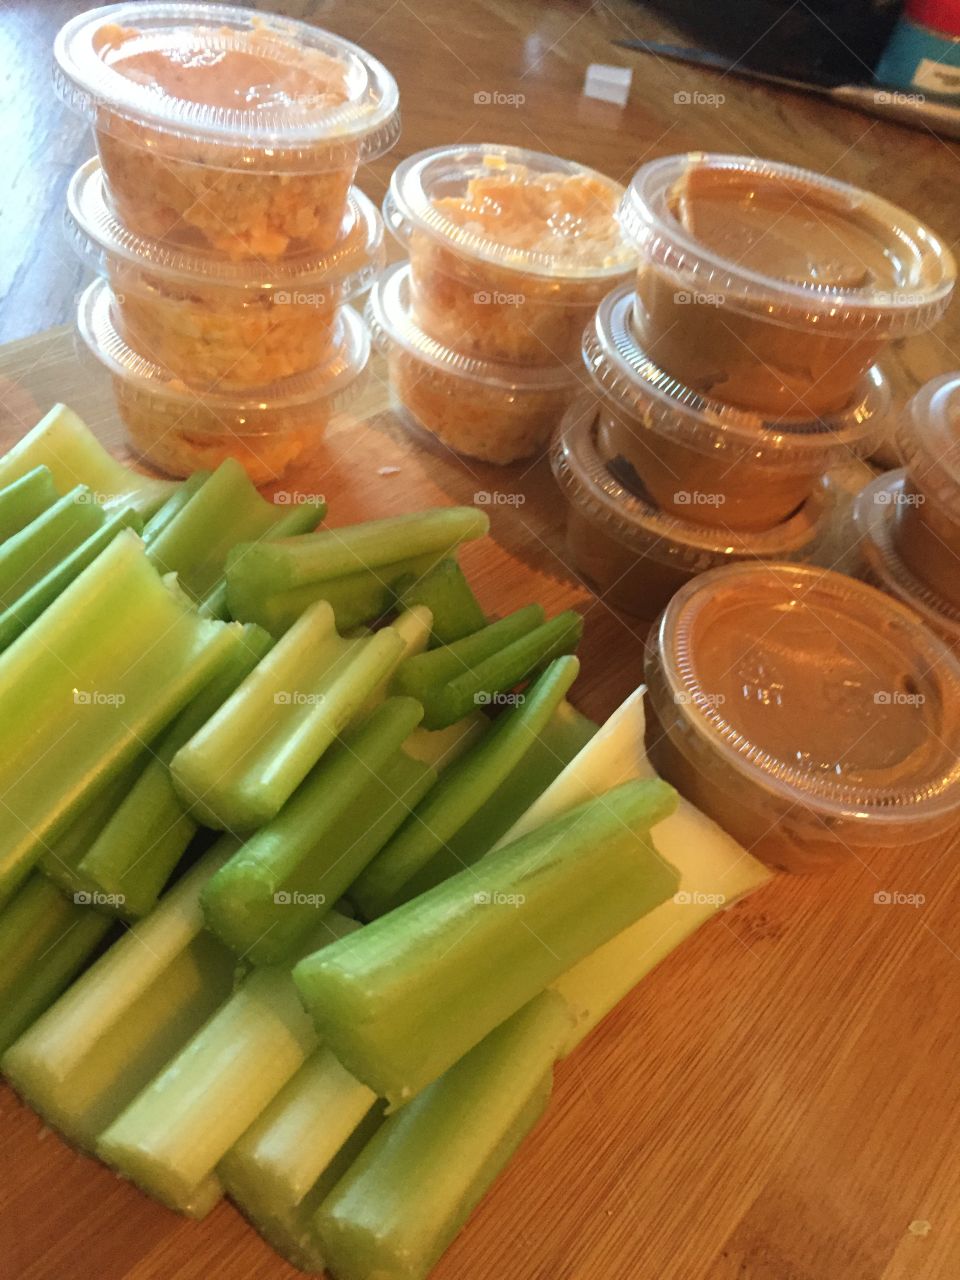 Fresh cut green veggies waiting to be dipped in these fun sized creamy peanut butter cups! The perfect healthy snack on the go!